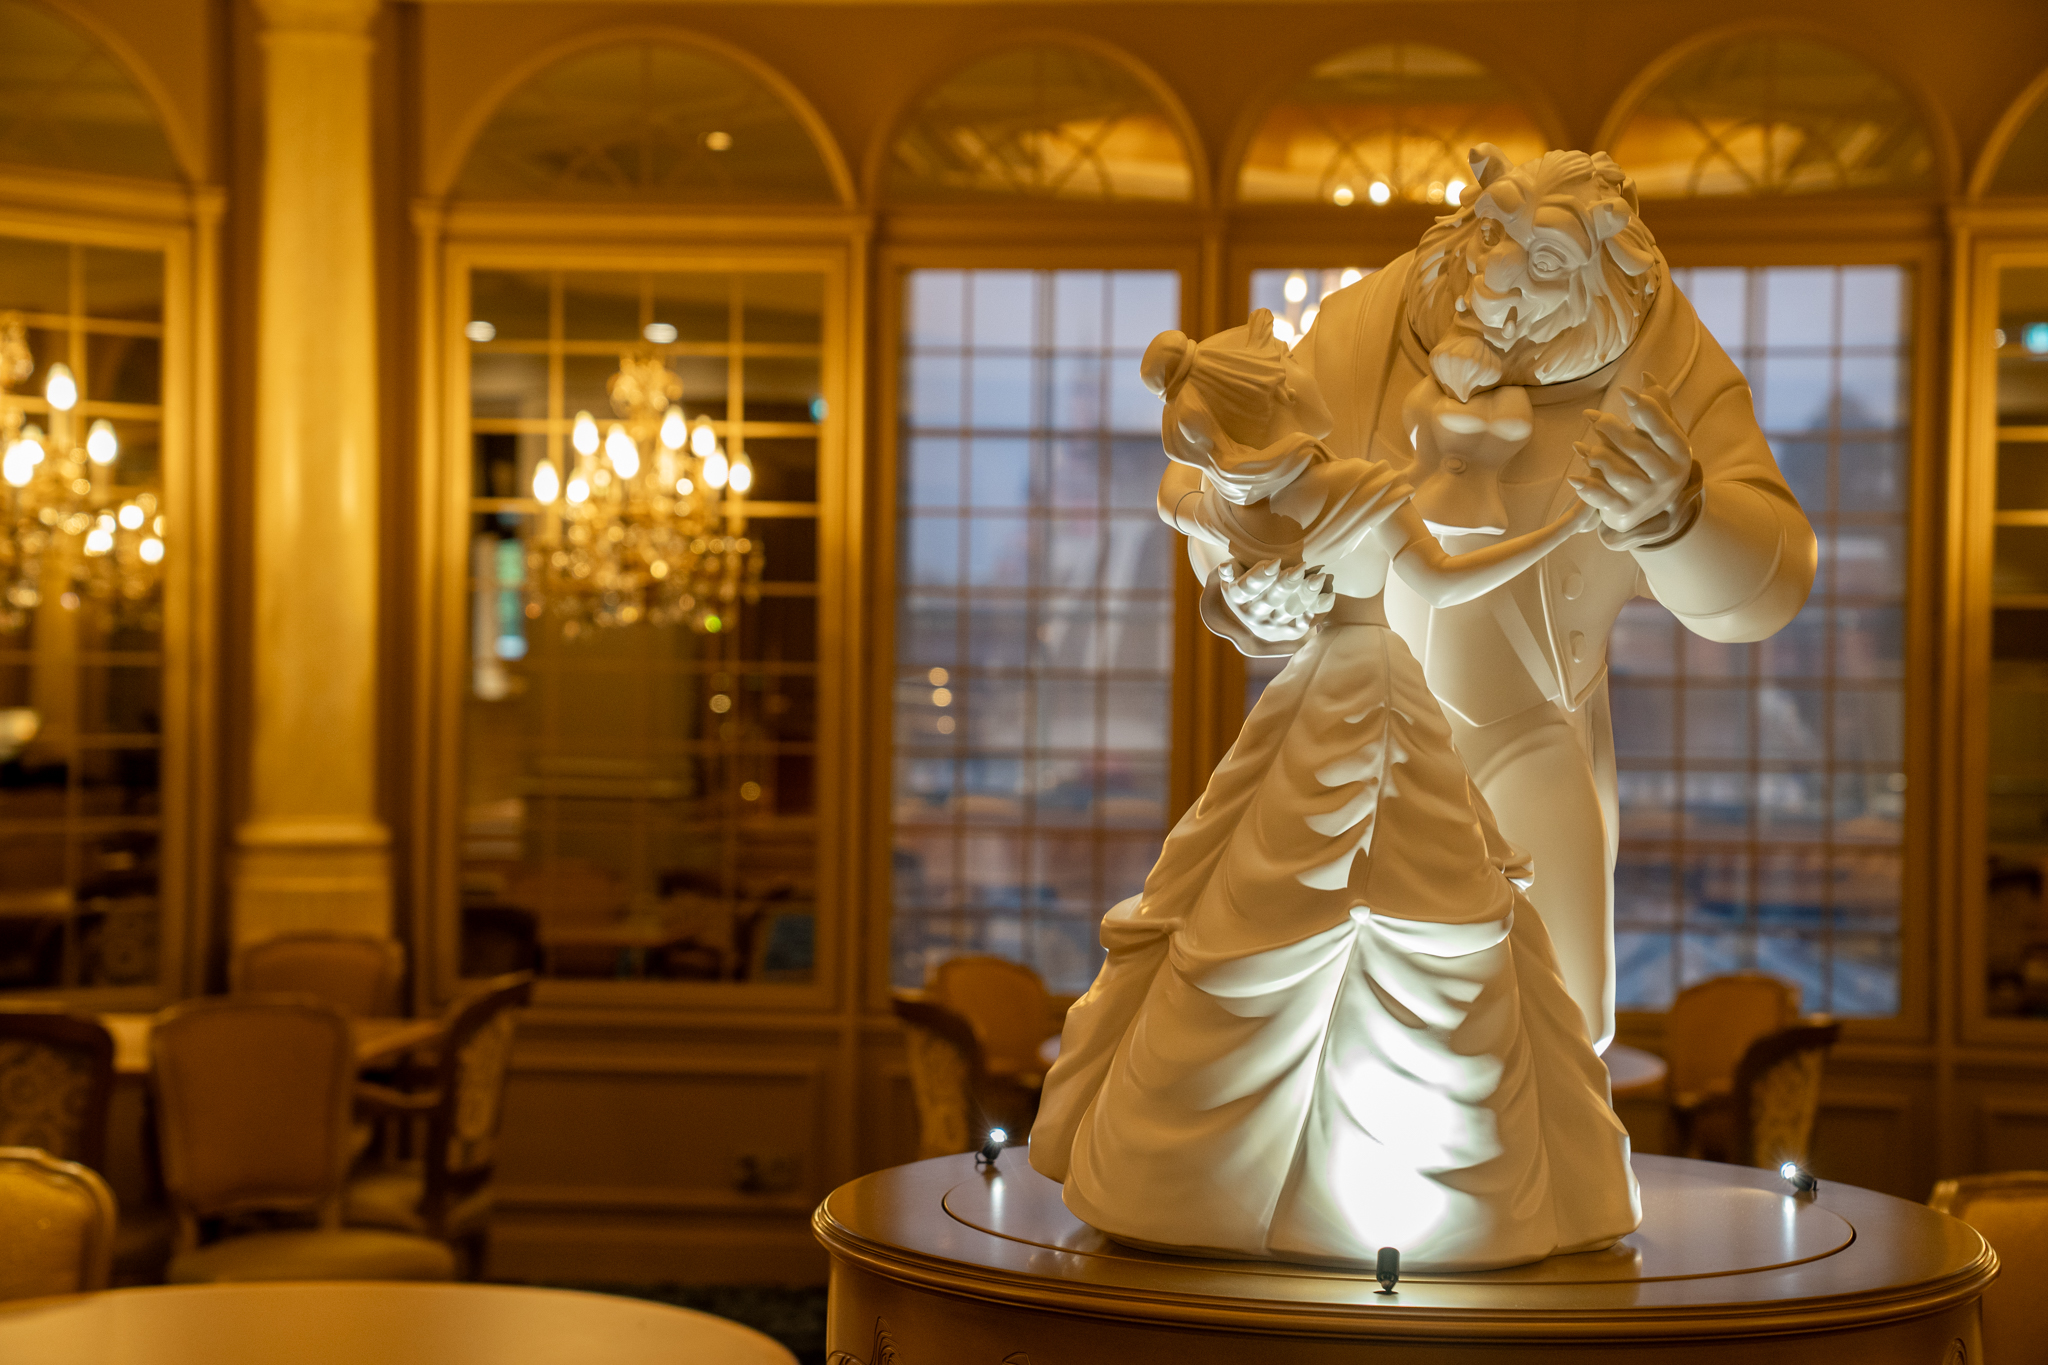 Disneyland Hotel: Excellence of French Savoir-Faire Adds To The Magic